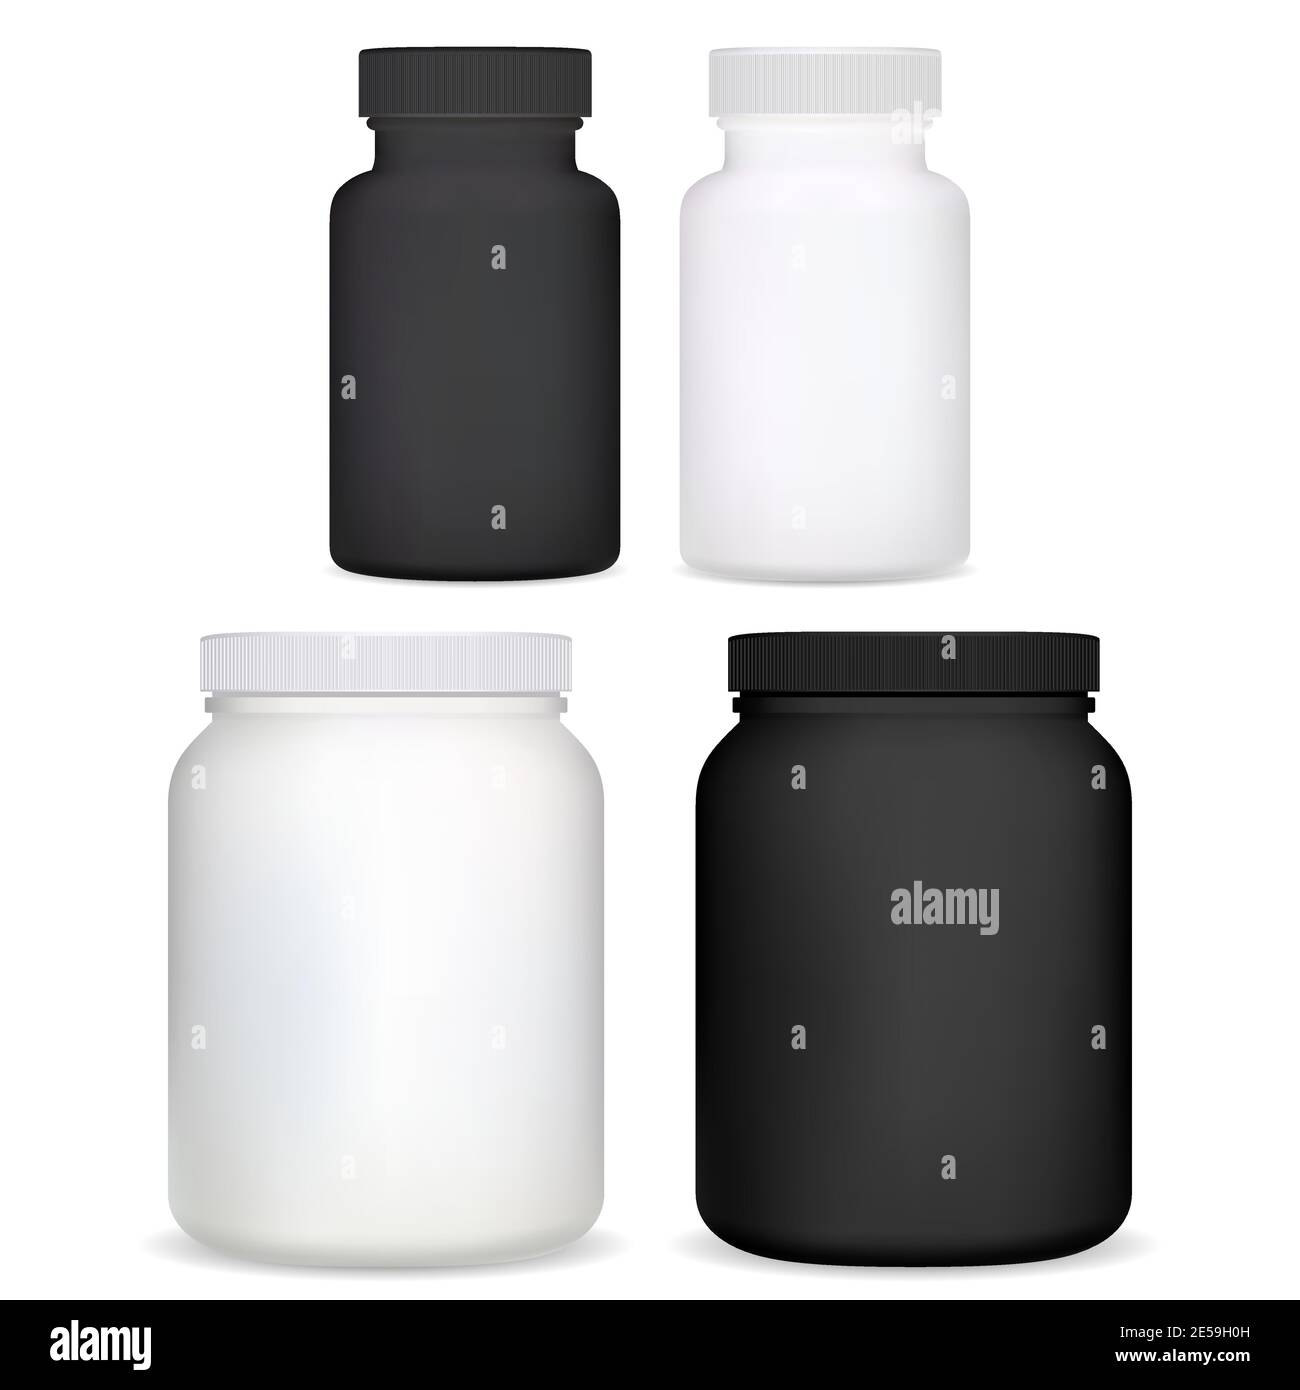 https://c8.alamy.com/comp/2E59H0H/supplement-bottle-plastic-vitamin-pill-jar-3d-vector-blank-isolated-medicine-container-in-black-and-white-for-tablet-capsule-pharmaceutical-produc-2E59H0H.jpg